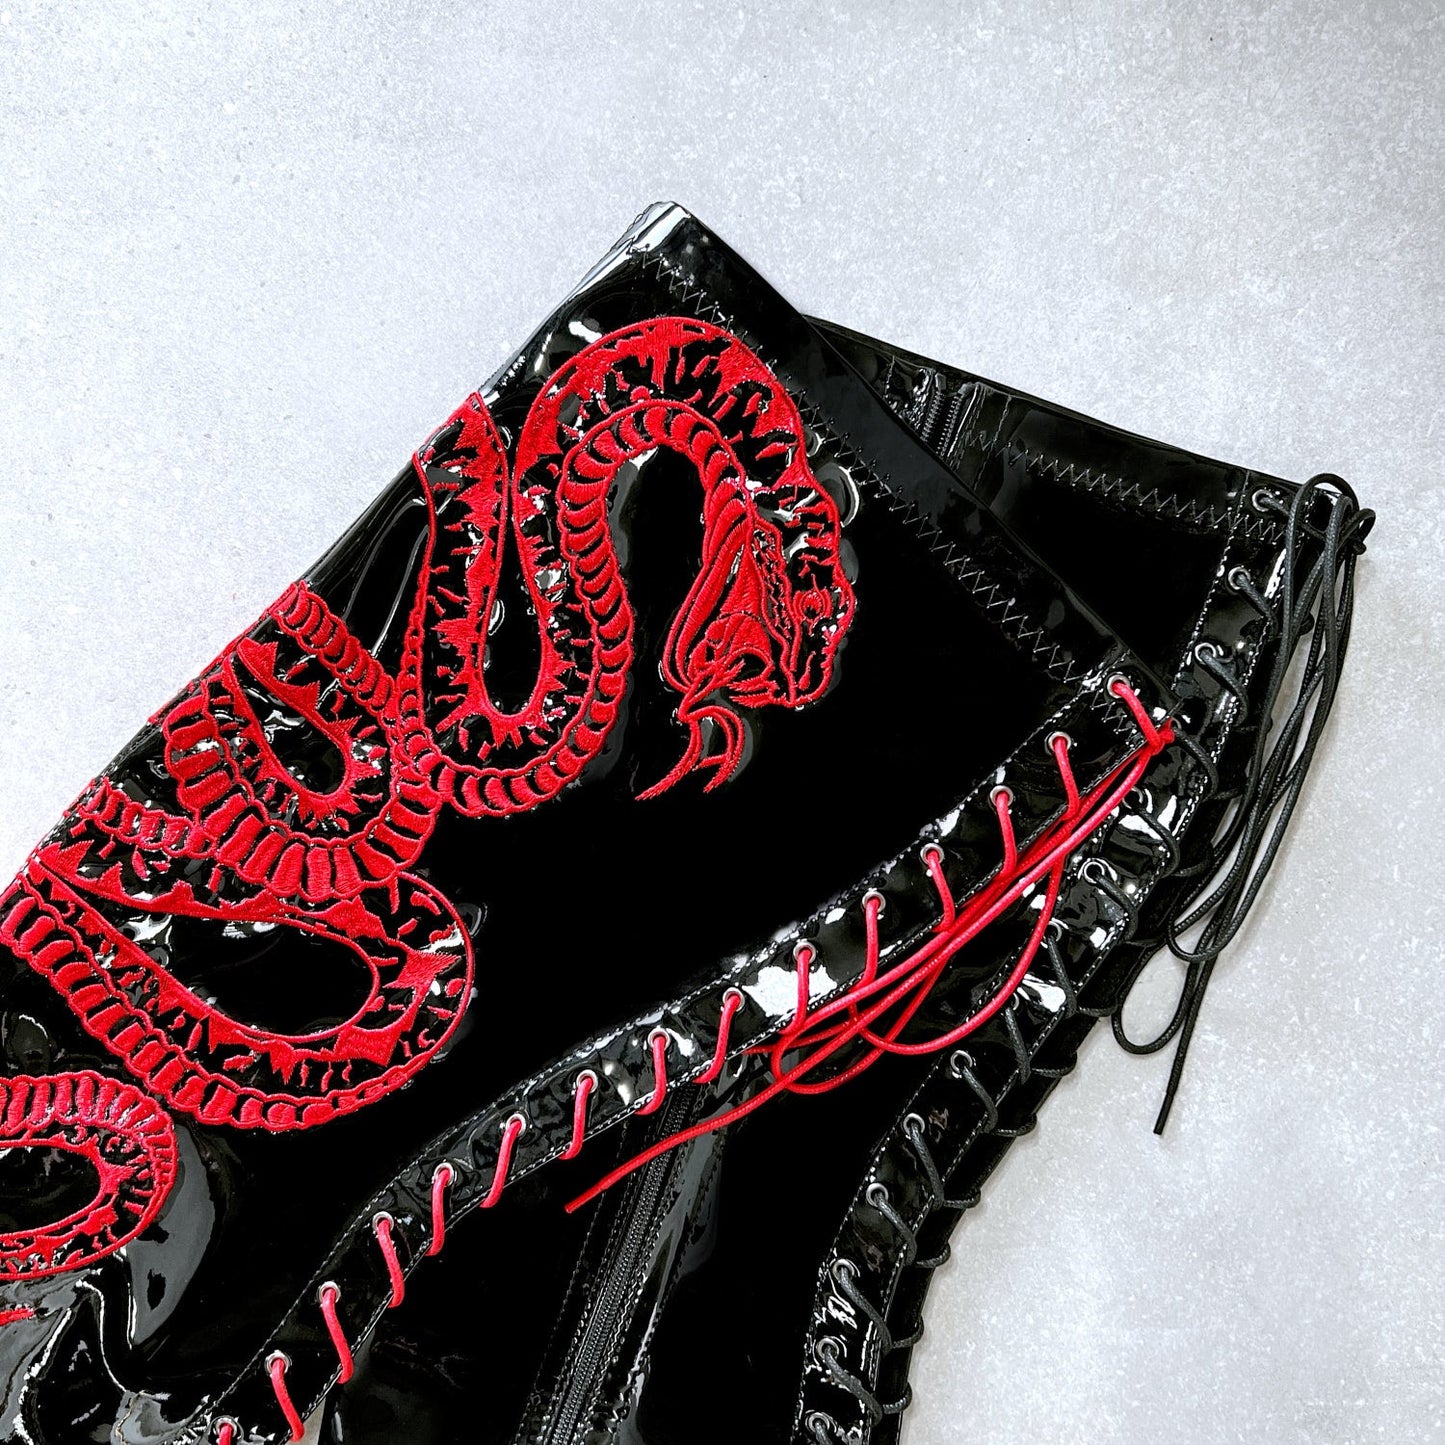 VIPER Boot Black with Red Thigh High - 7INCH